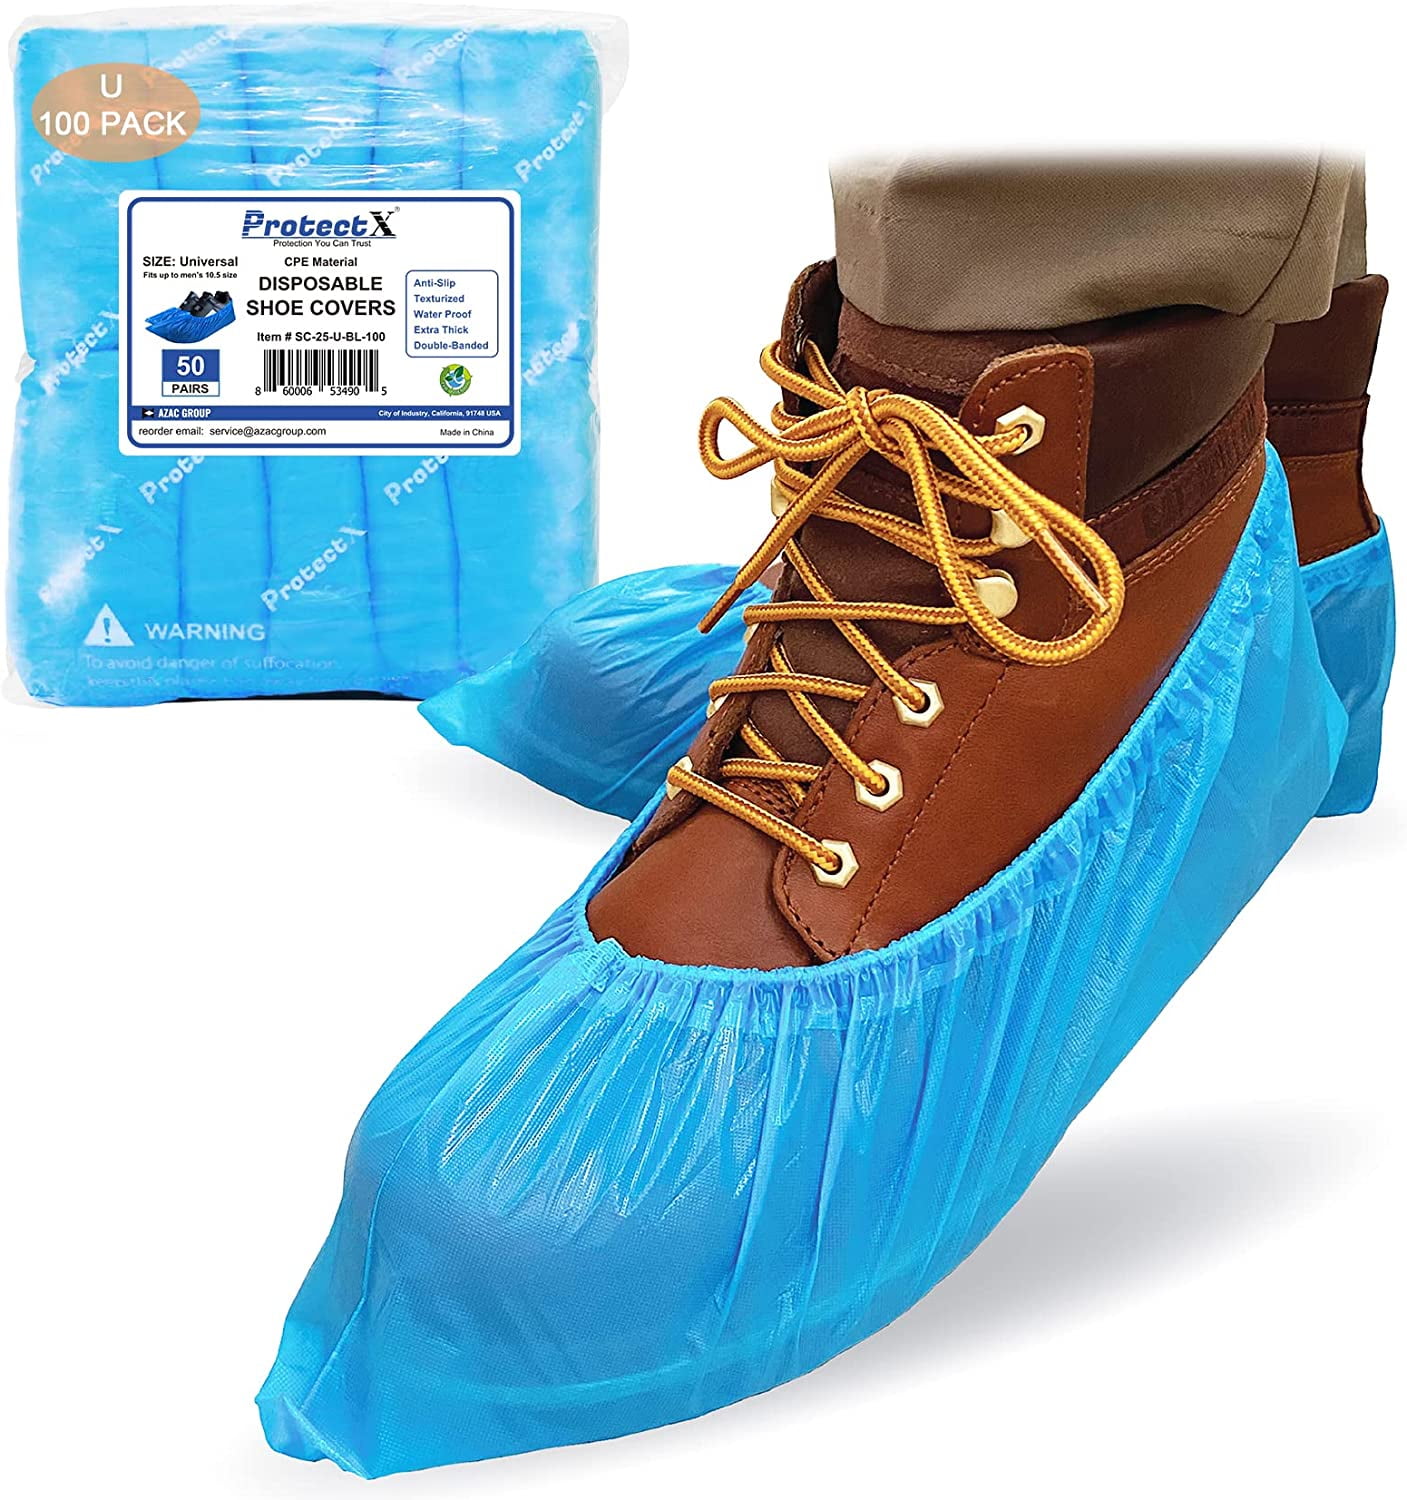 ProtectX Disposable Shoe & Boot Covers, 100-pack (50 pairs